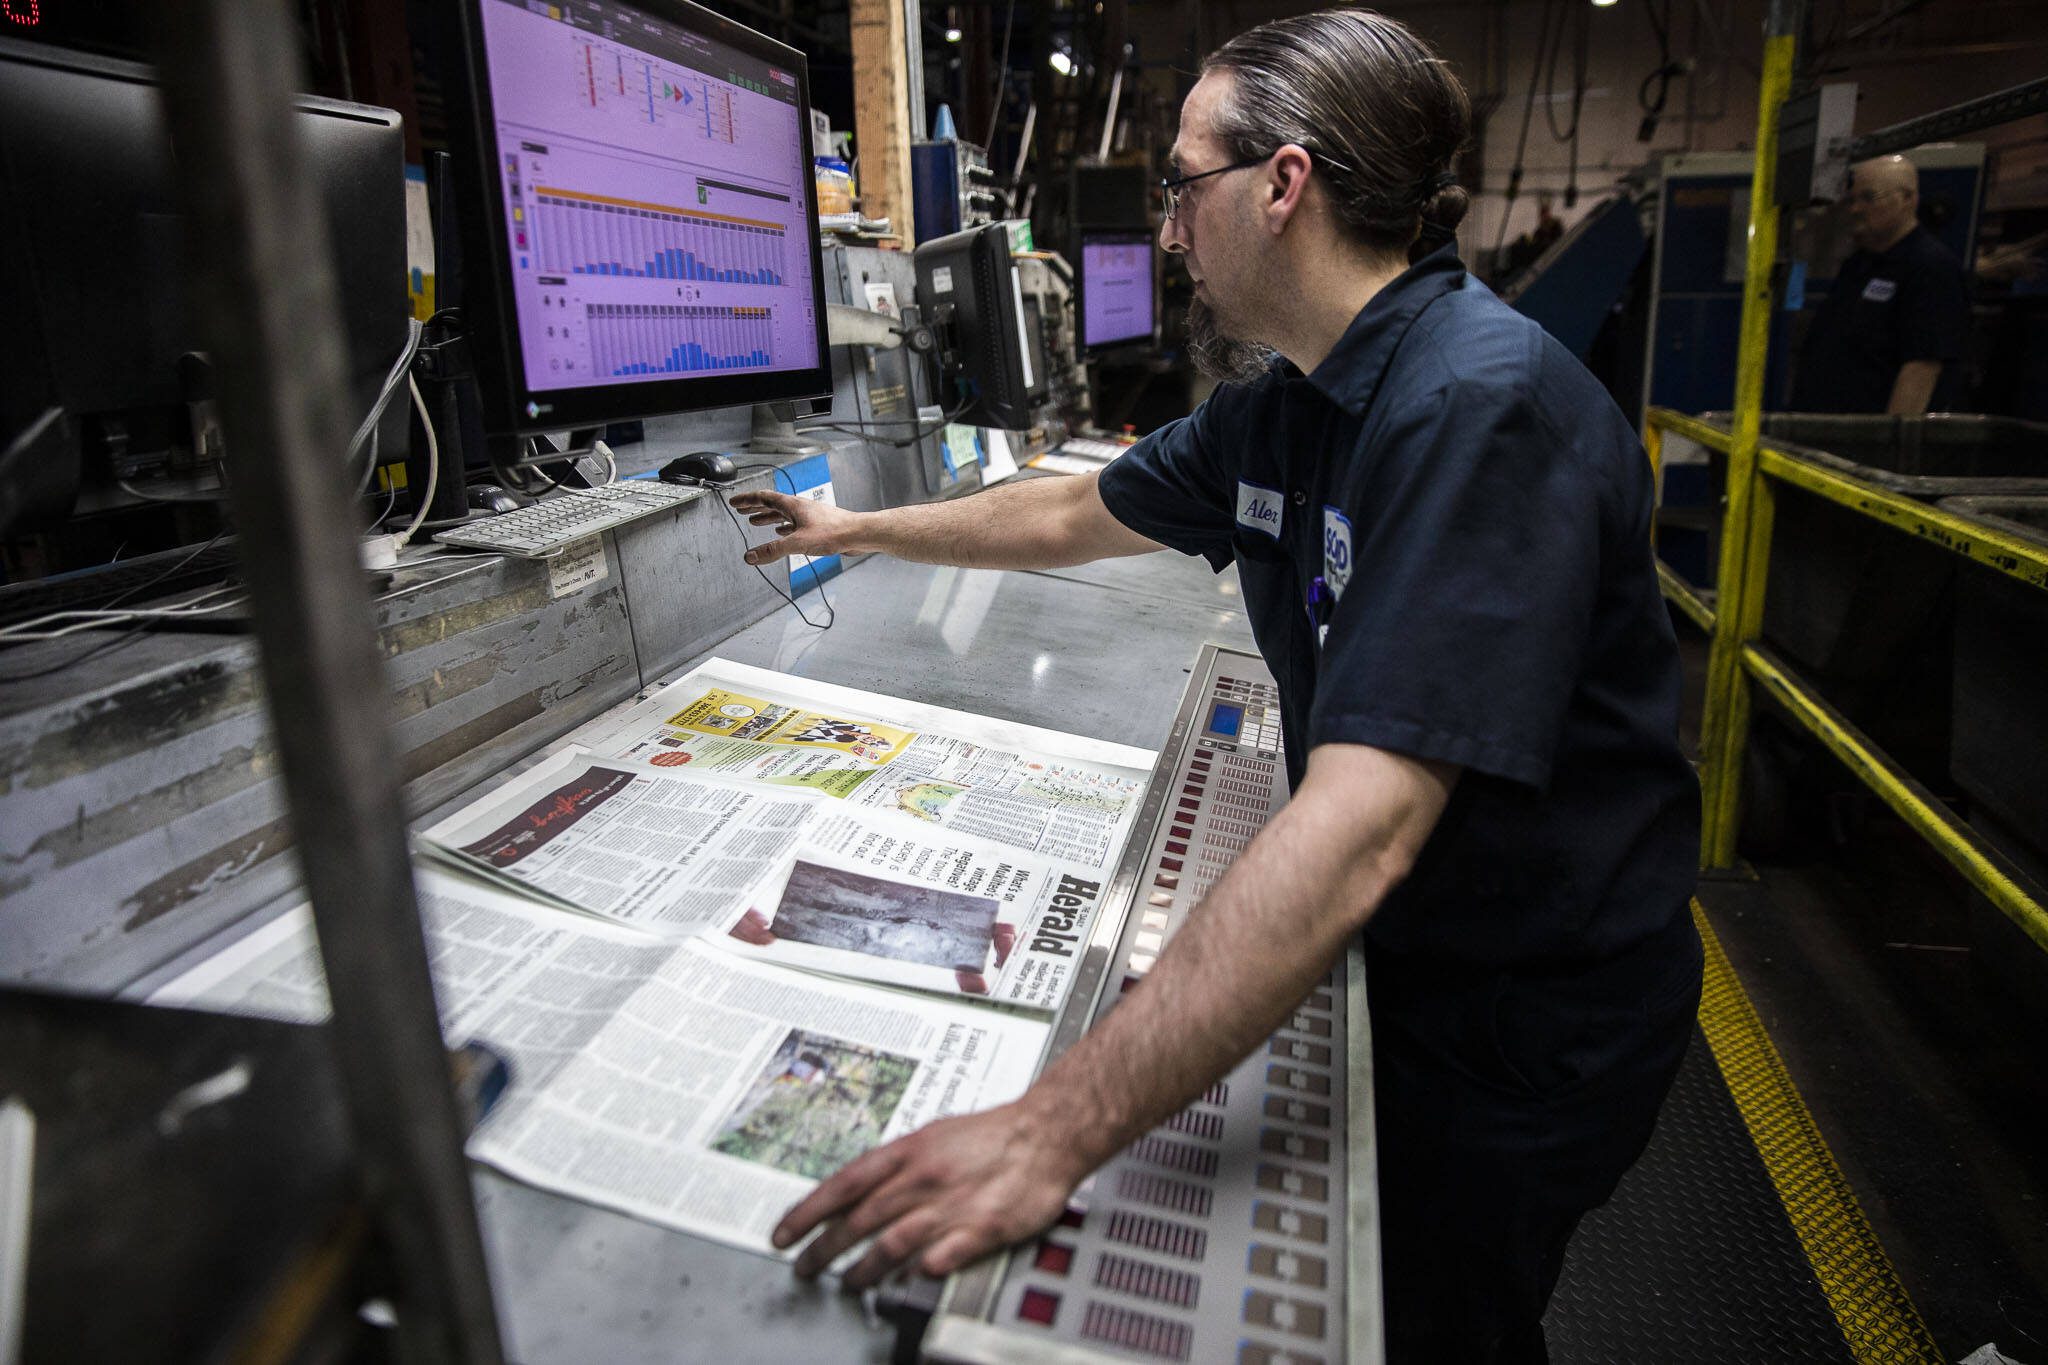 Alex Hanson looks over sections of the Herald and sets the ink on Wednesday, March 30, 2022 in Everett, Washington. (Olivia Vanni / The Herald)